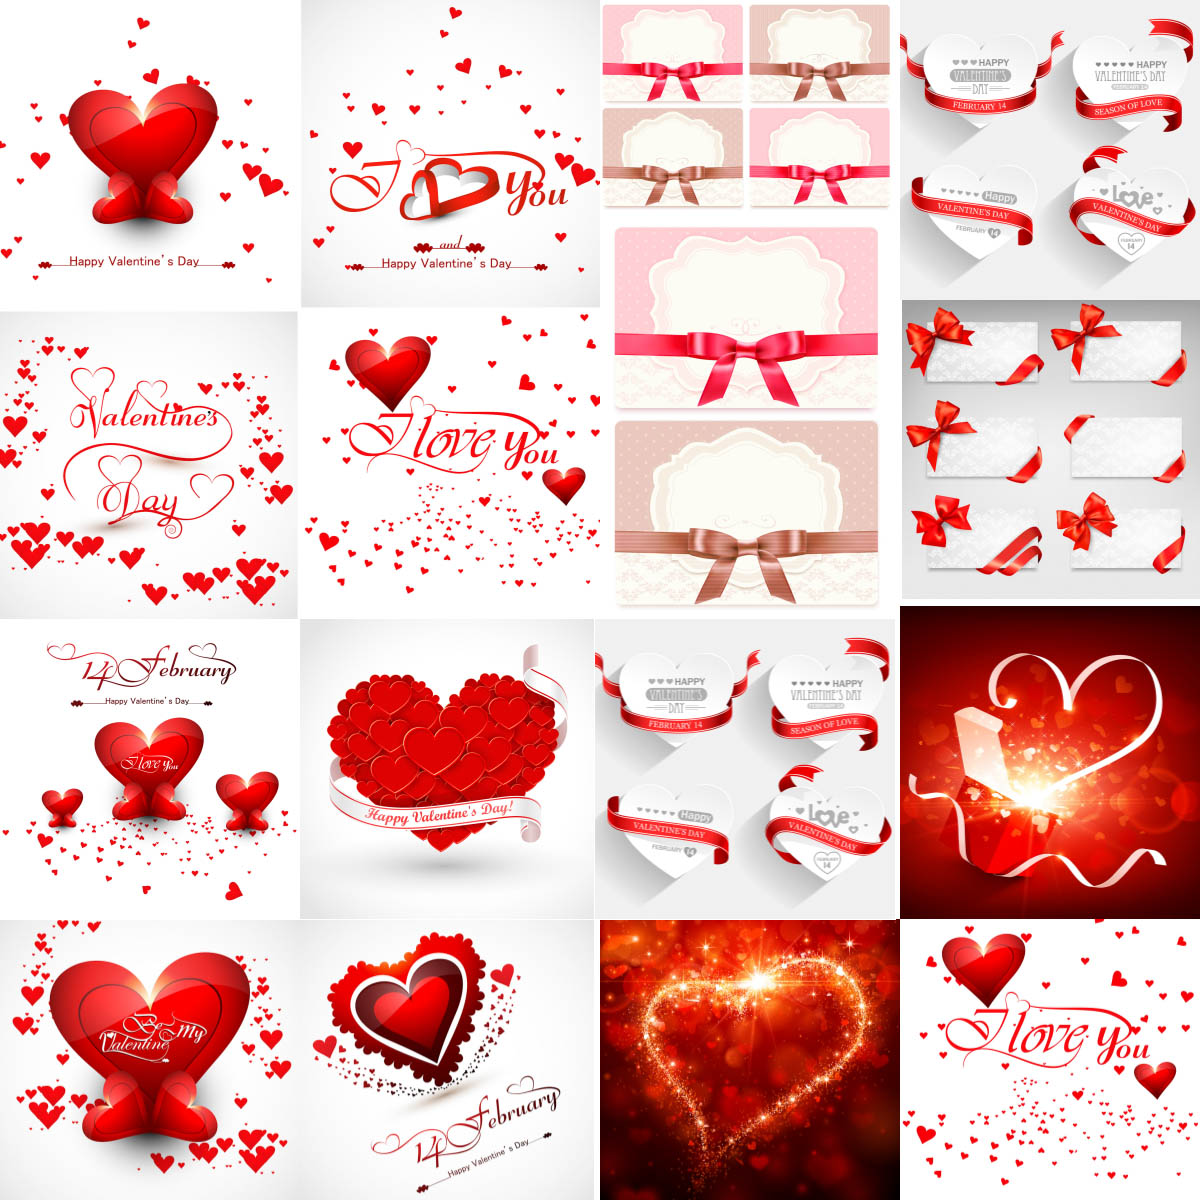 Valentine's Day, backgrounds with hearts vector